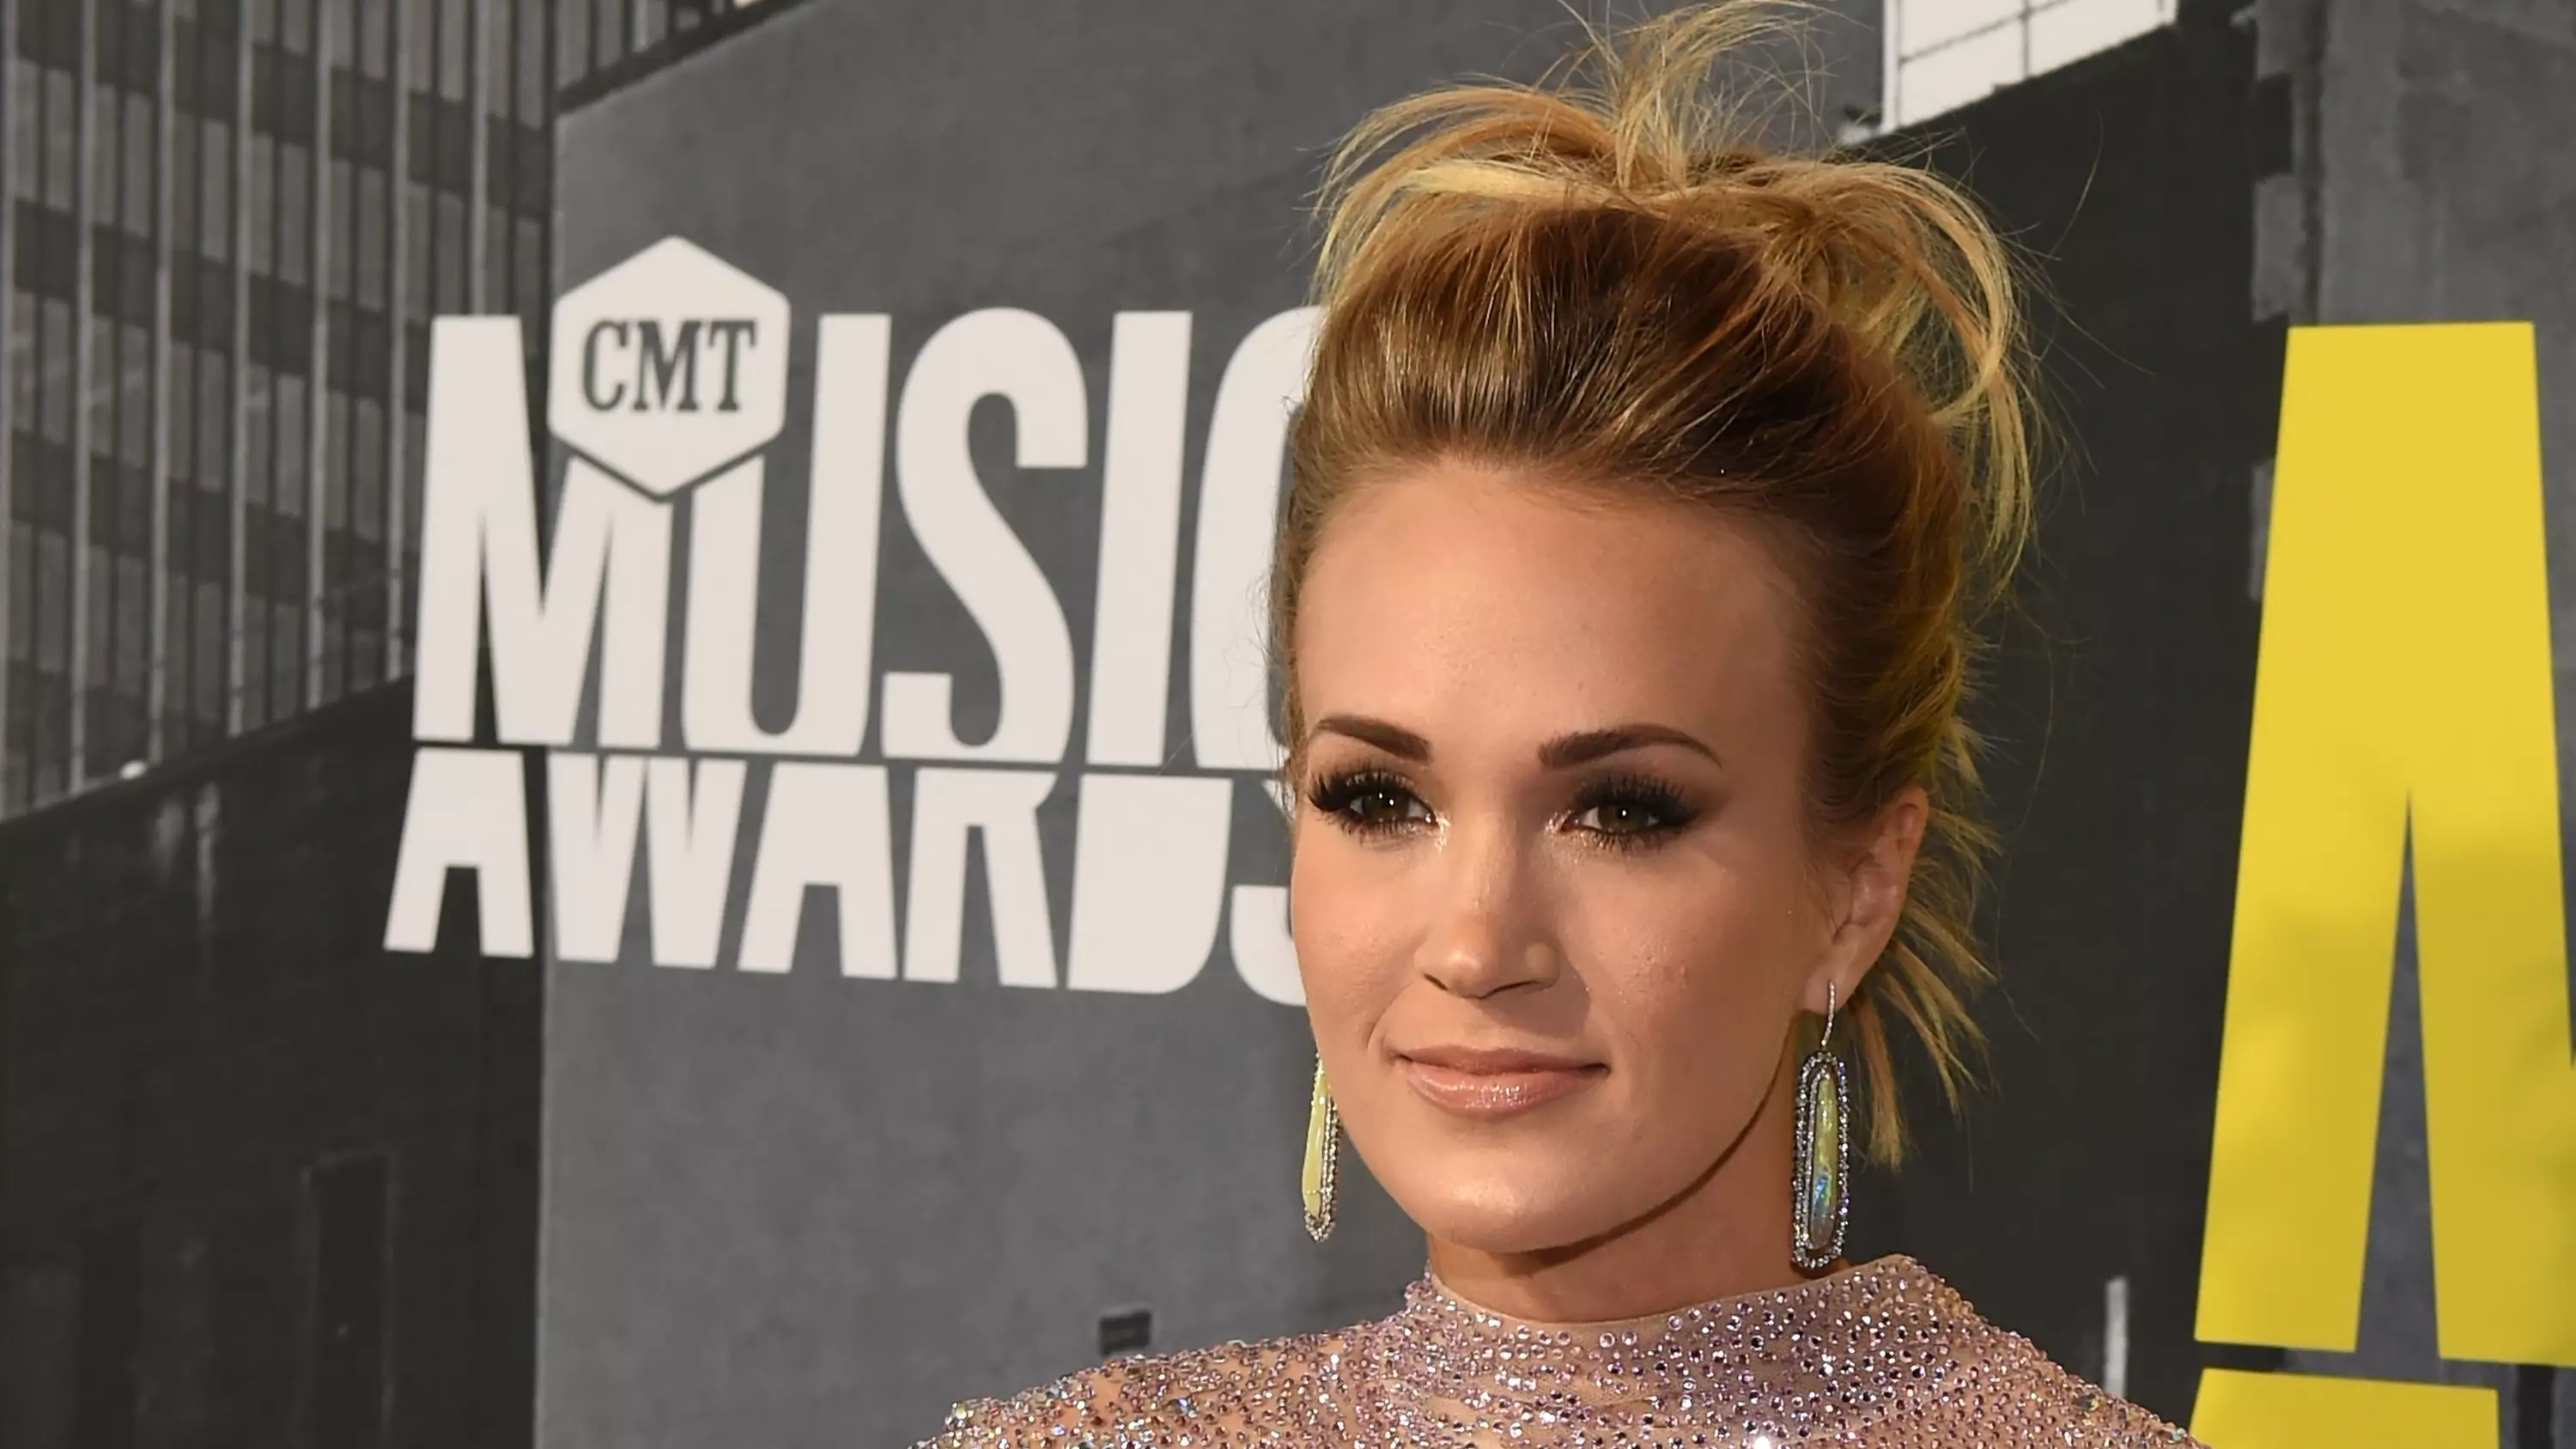 Carrie Underwood Tells Fans She Might 'Look A Bit Different' Following Fall 